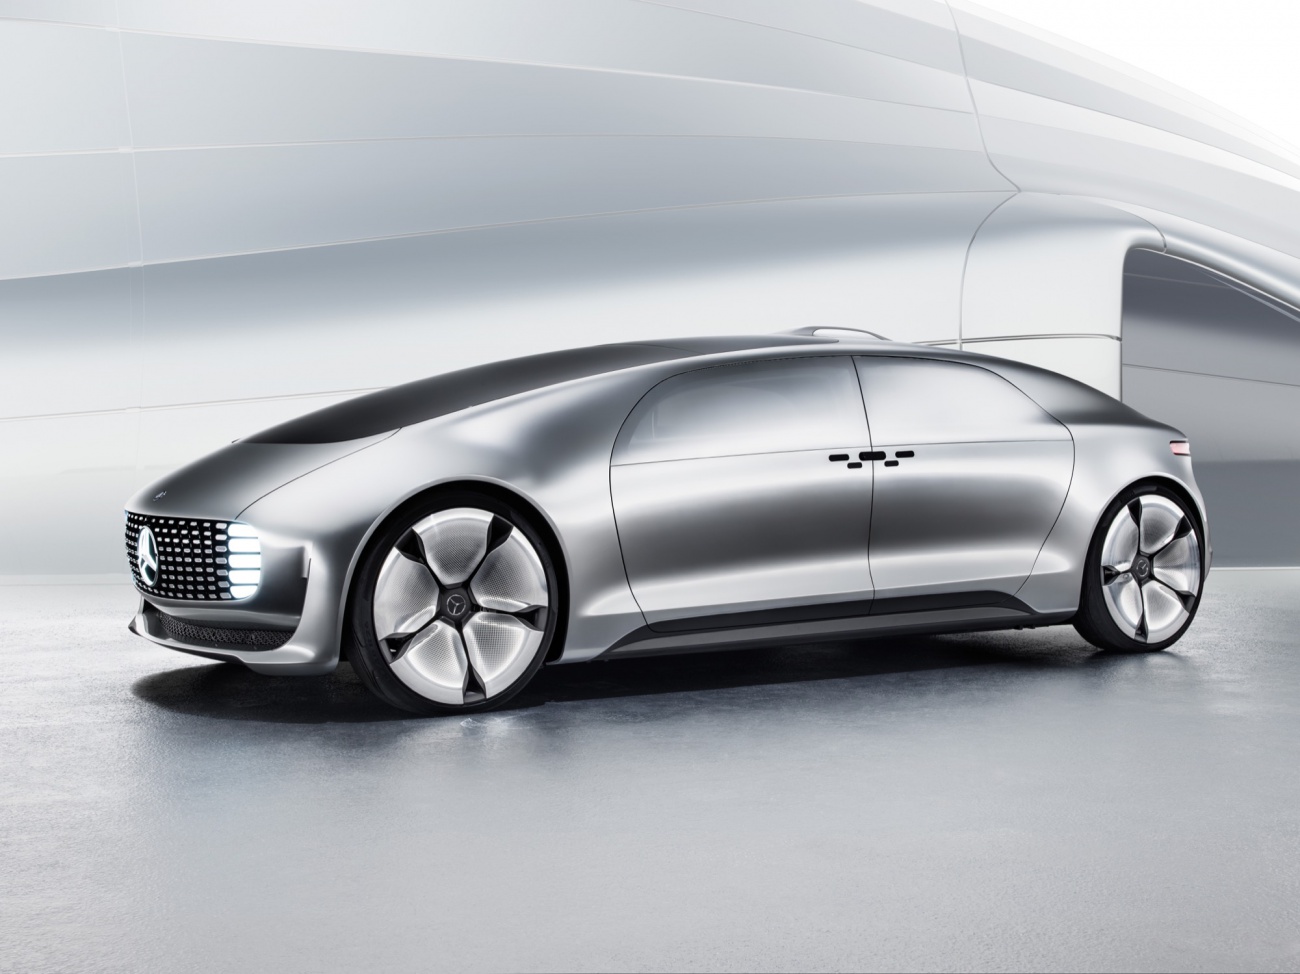 mercedes-benz-concept-F015-luxury-in-motion-02